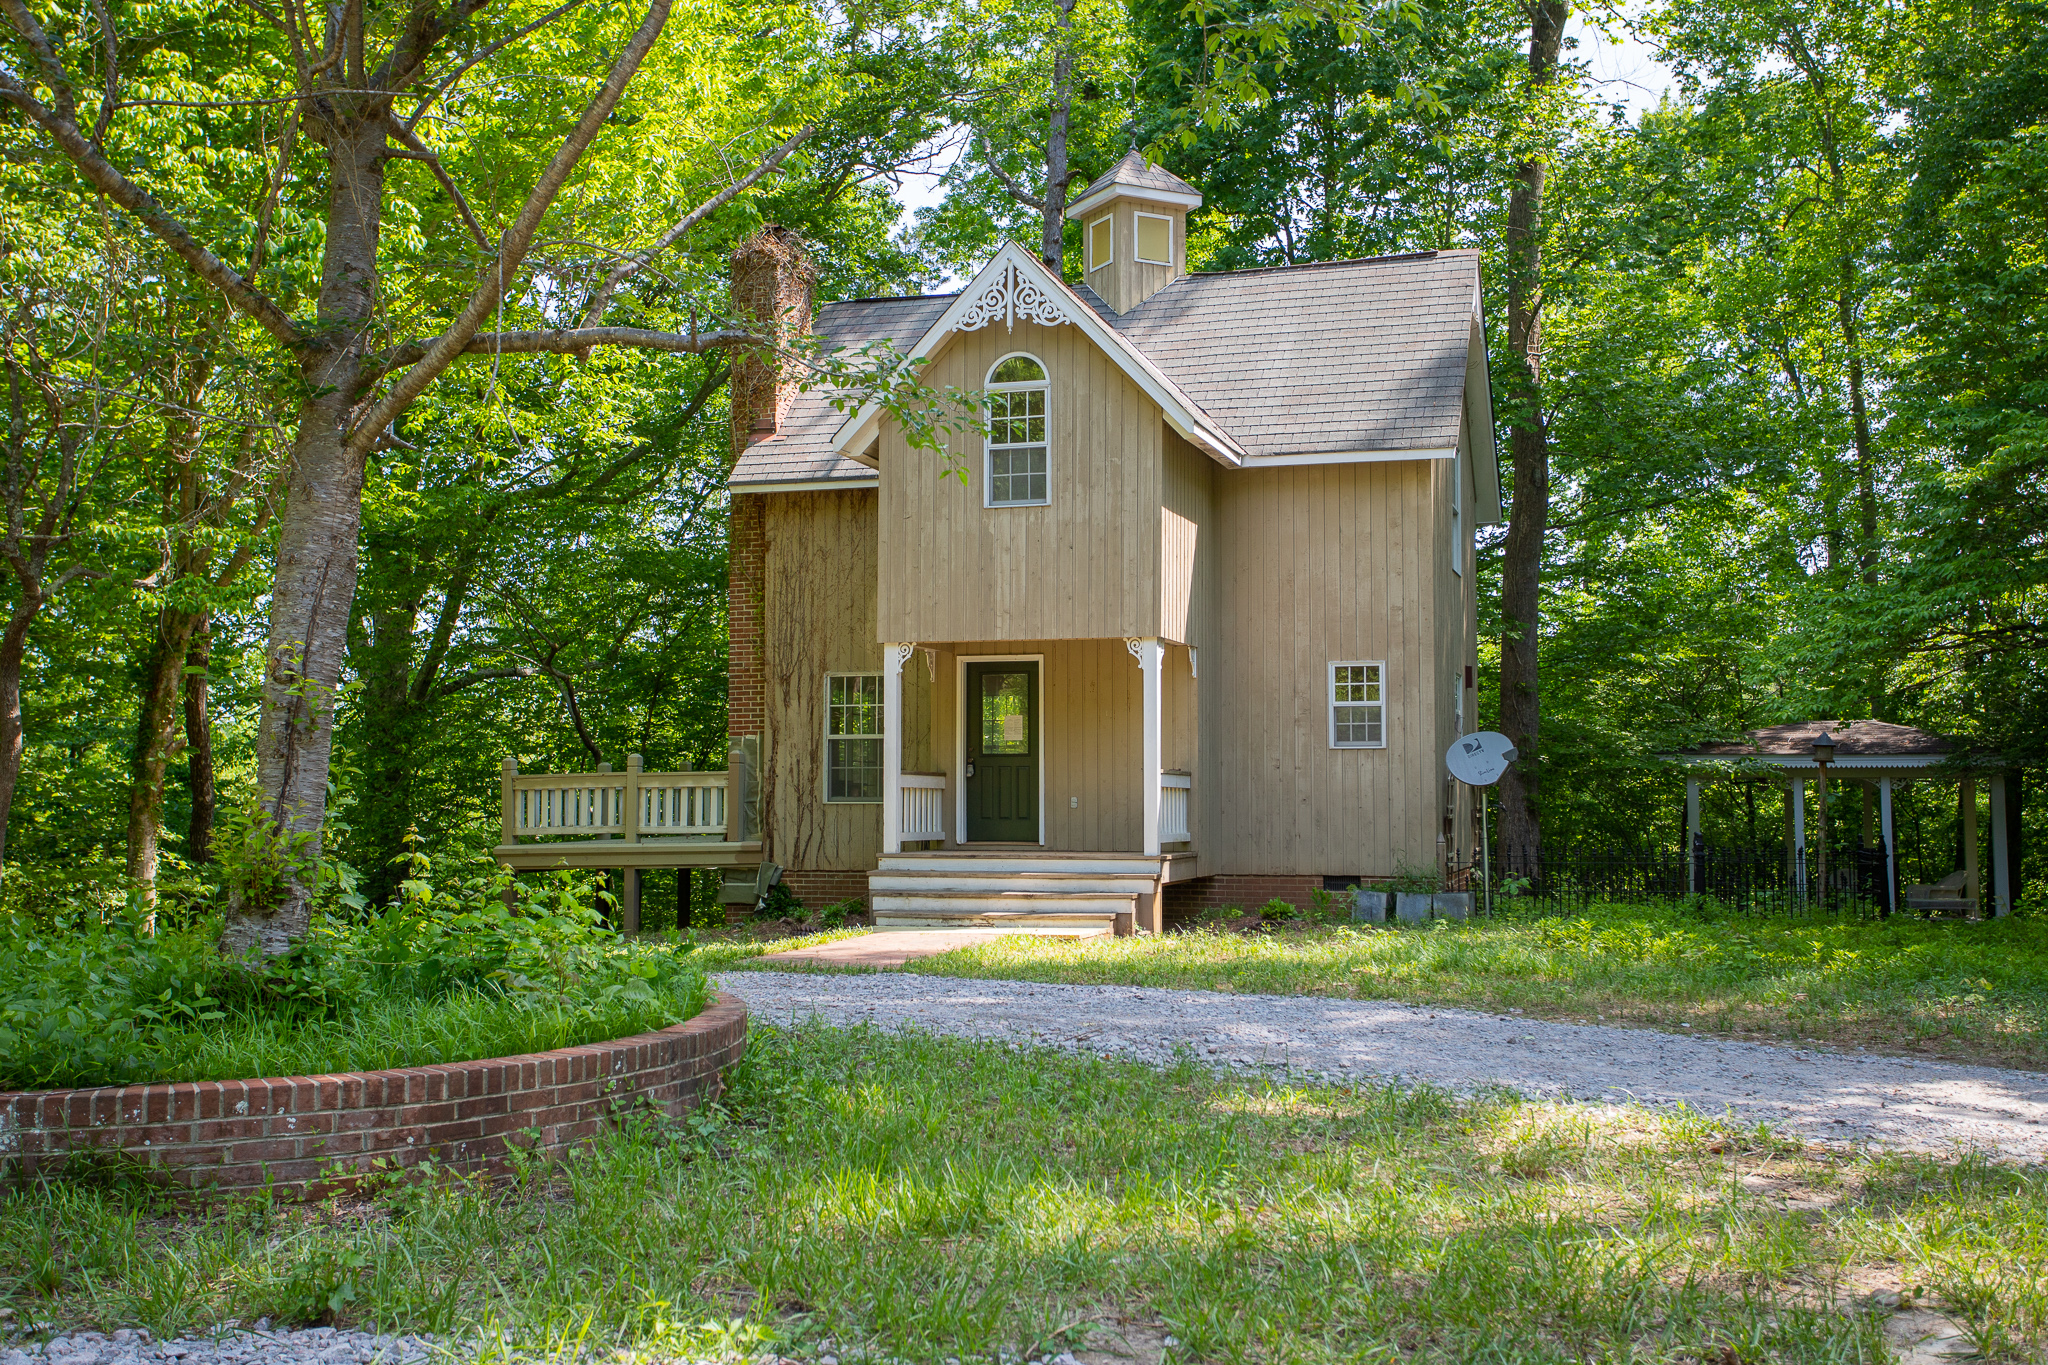 Storybook Home on 10 Acres with a Creek! 9410 McKenney Hwy